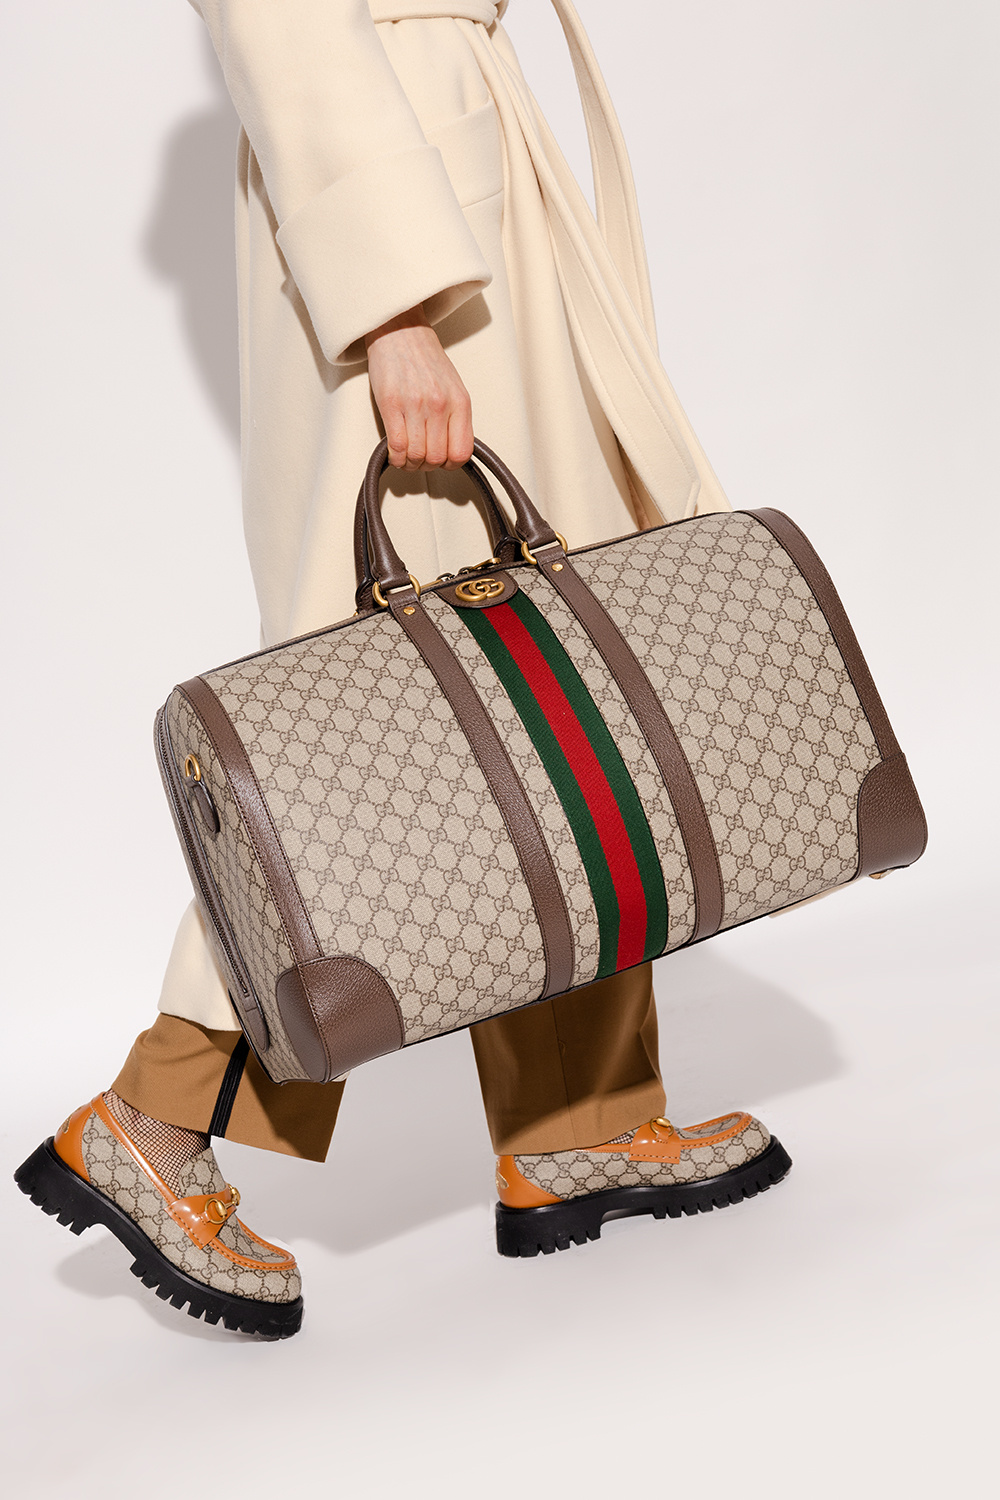 Gucci Savoy Medium Carry On Suitcase in Beige - Gucci